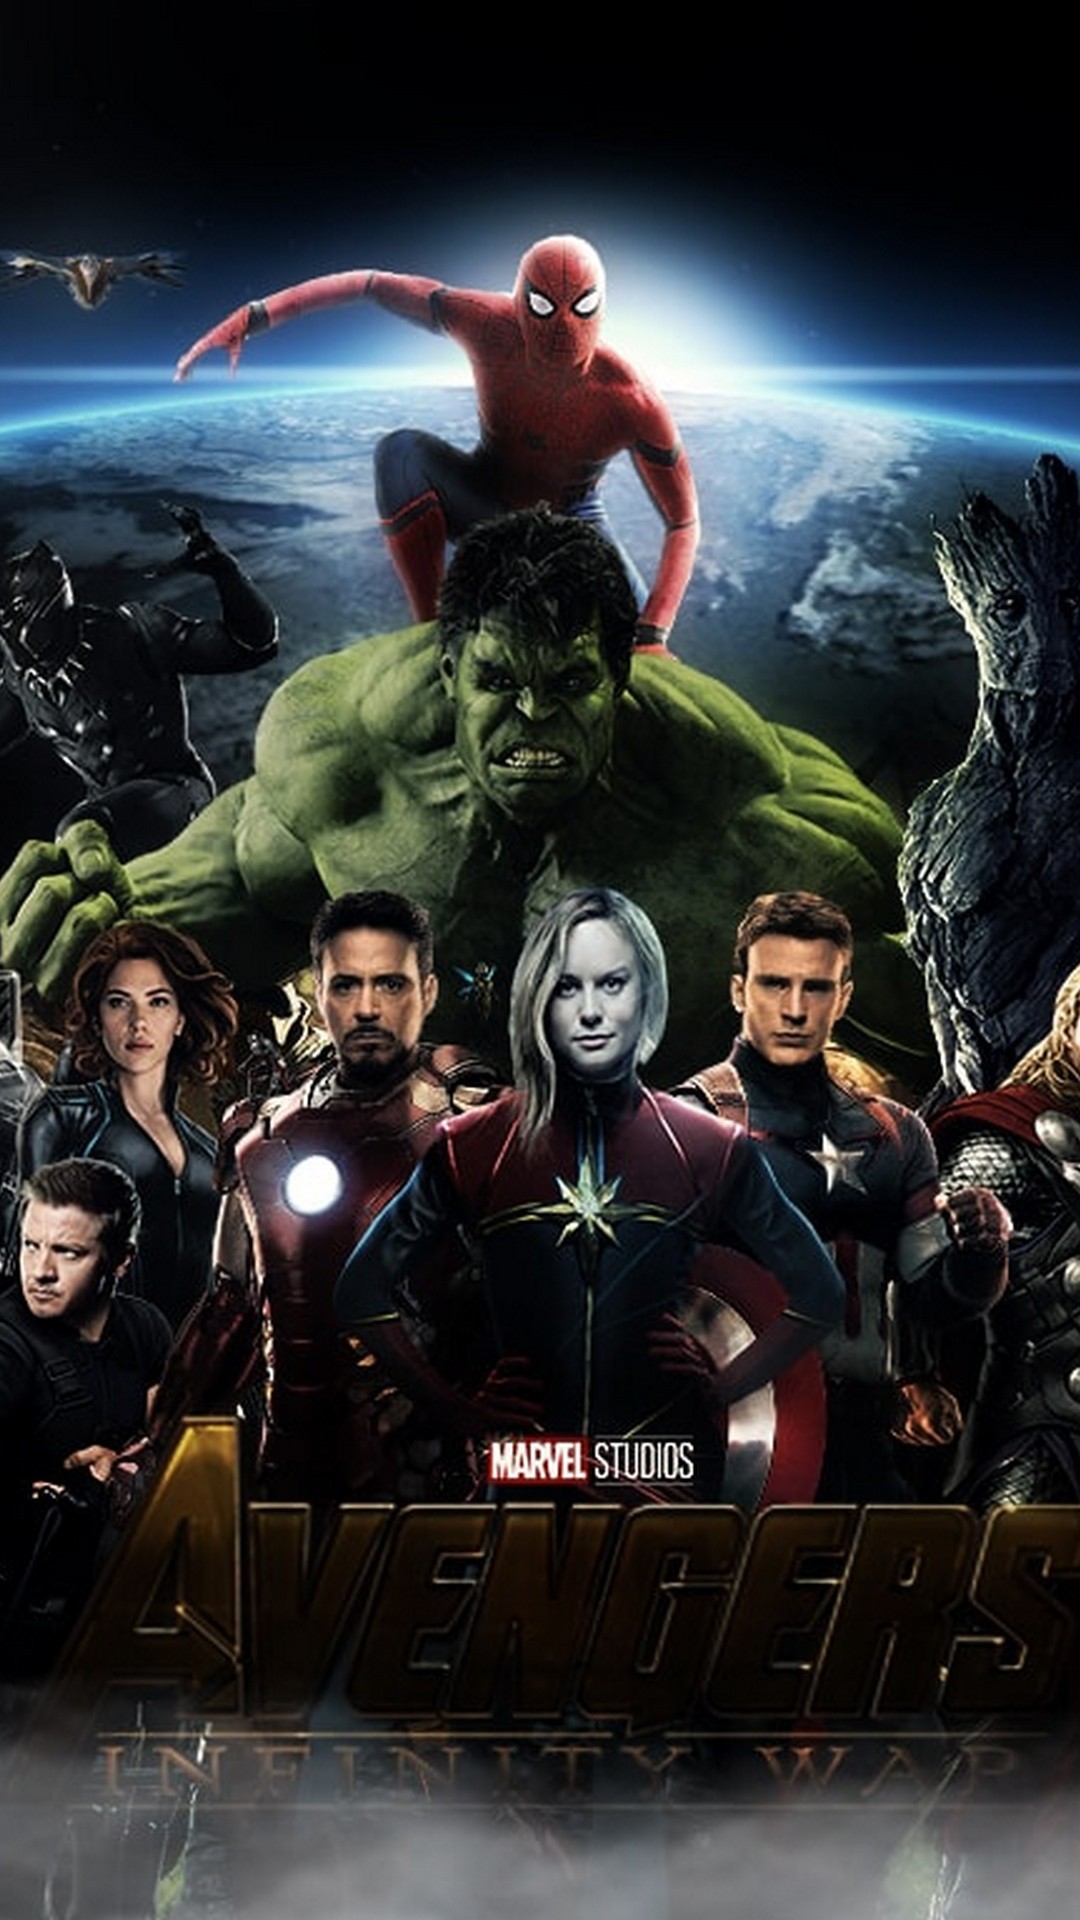 Avengers 3 Wallpaper For Android with HD resolution 1080x1920